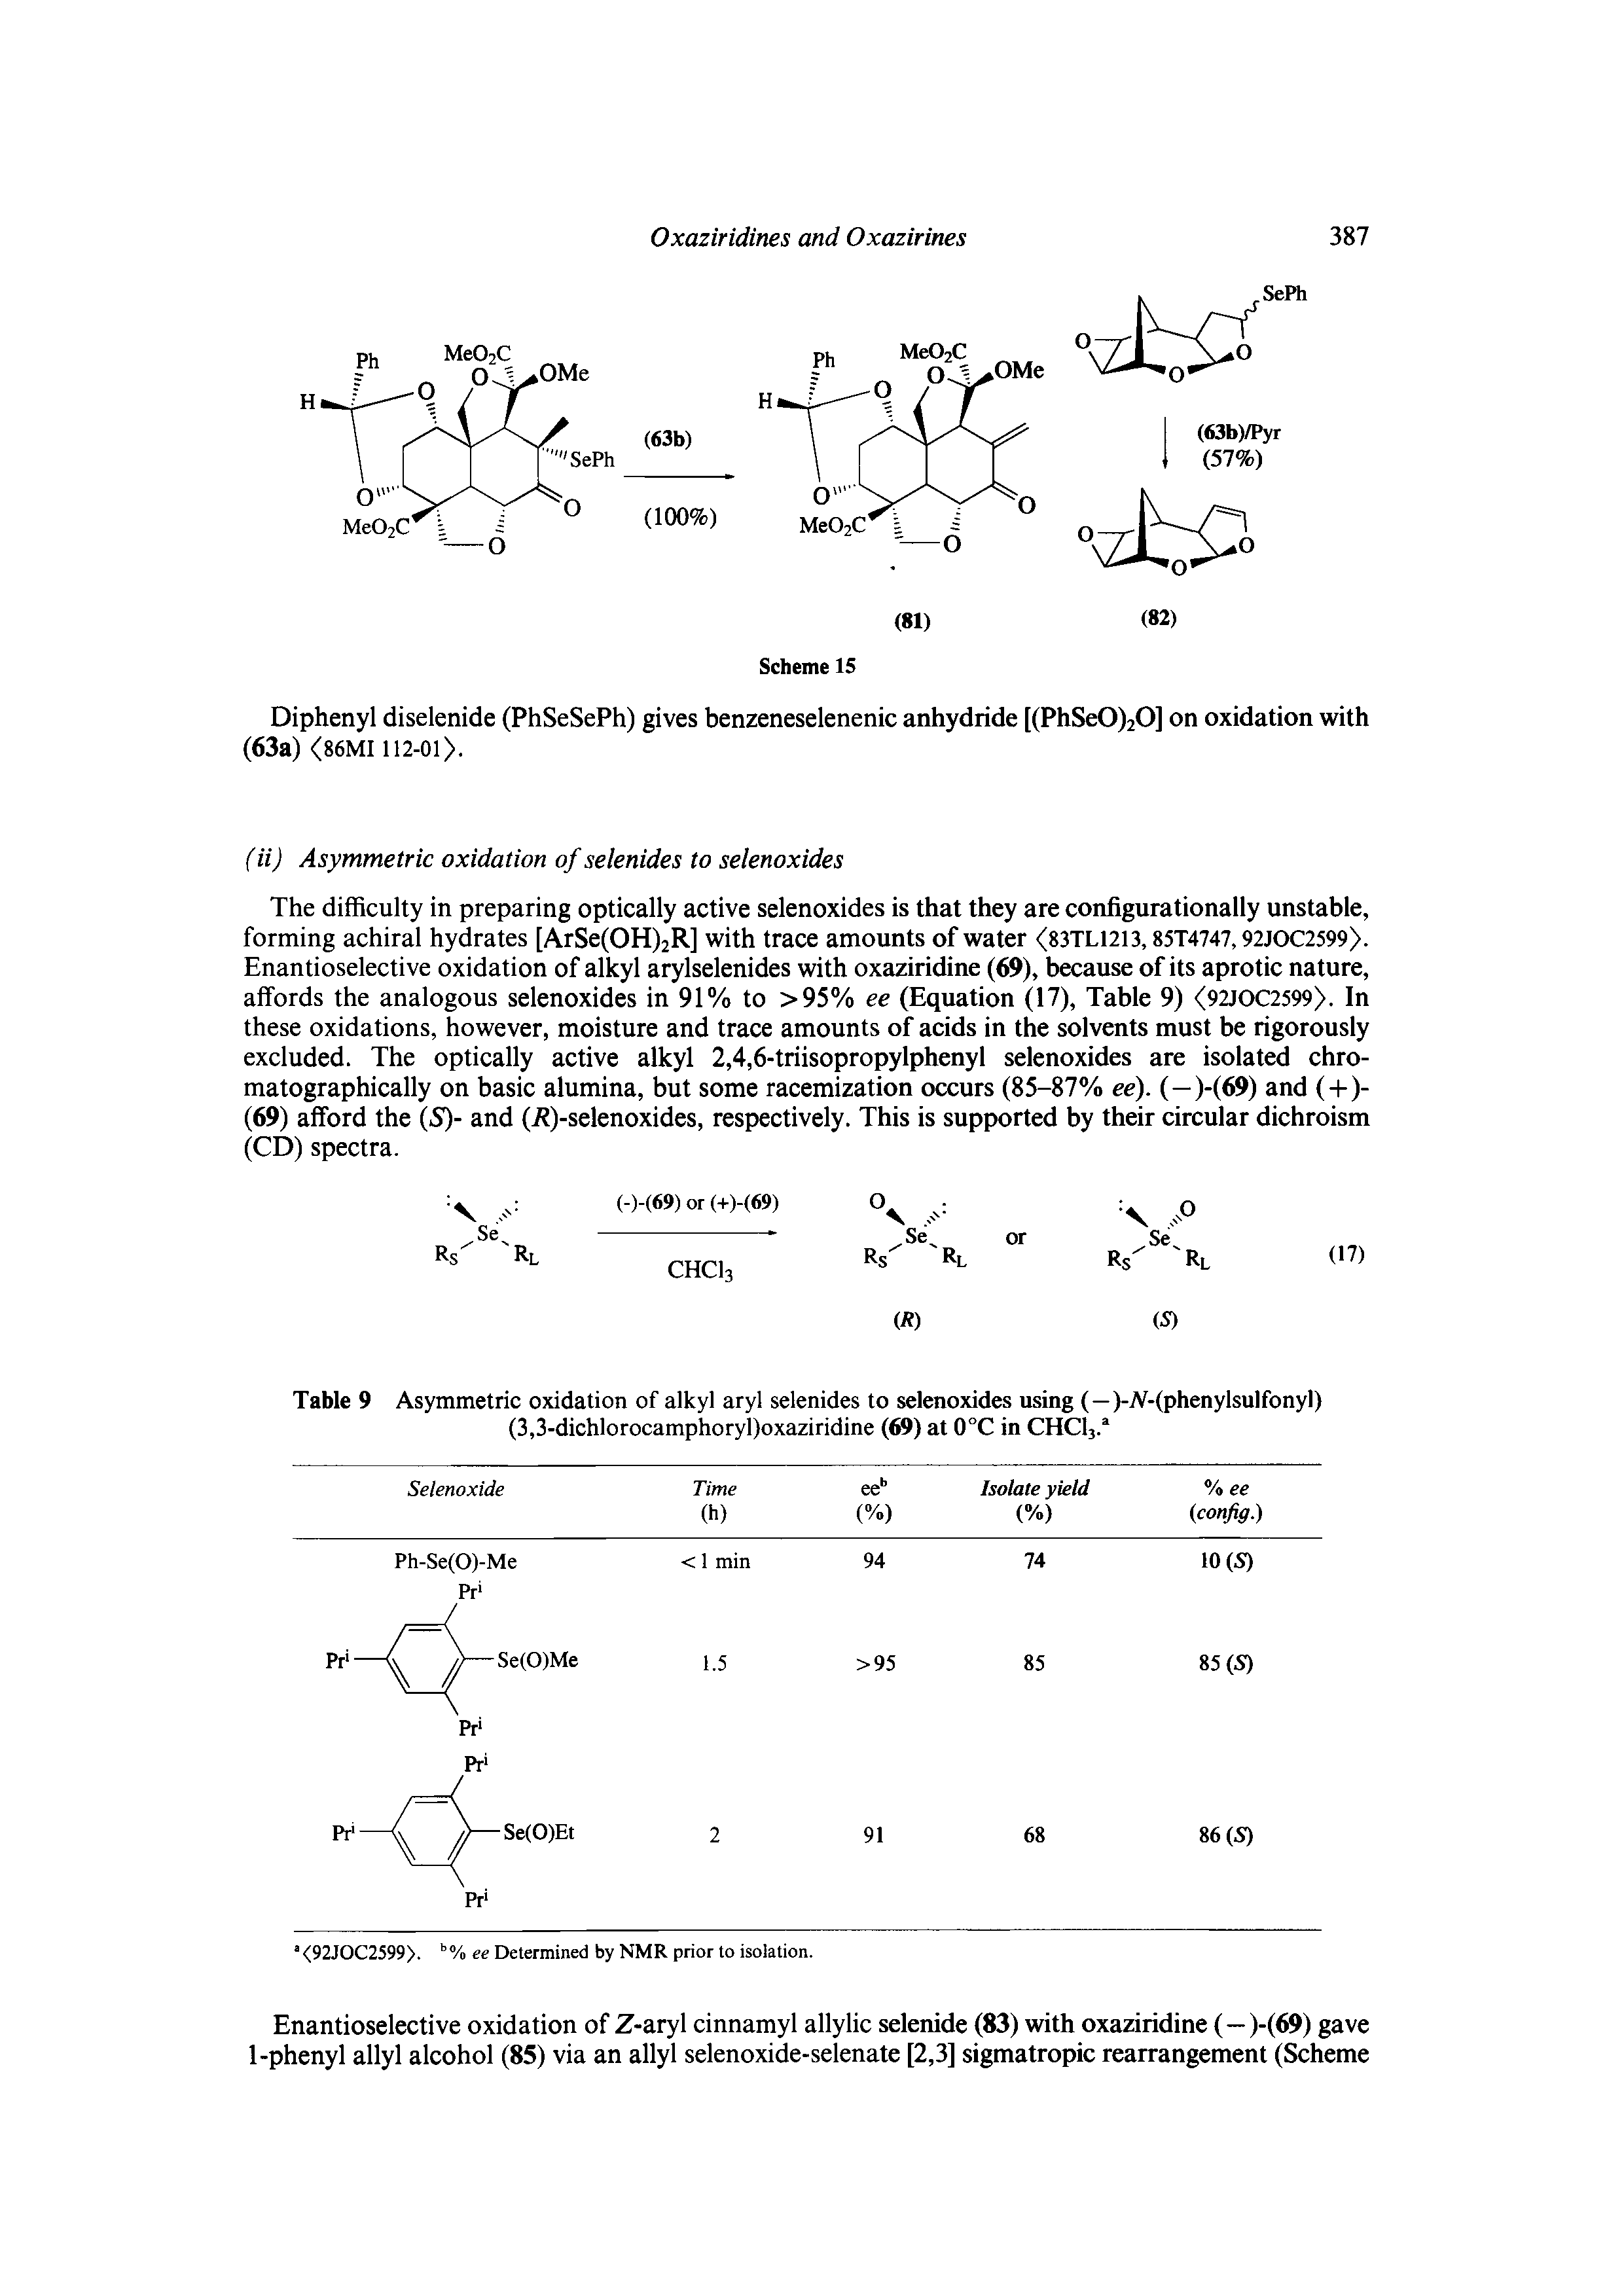 Table 9 Asymmetric oxidation of alkyl aryl selenides to selenoxides using (—)-A-(phenylsulfonyl) (3,3-dichlorocamphoryl)oxaziridine (69) at 0°C in CHCl3.a...